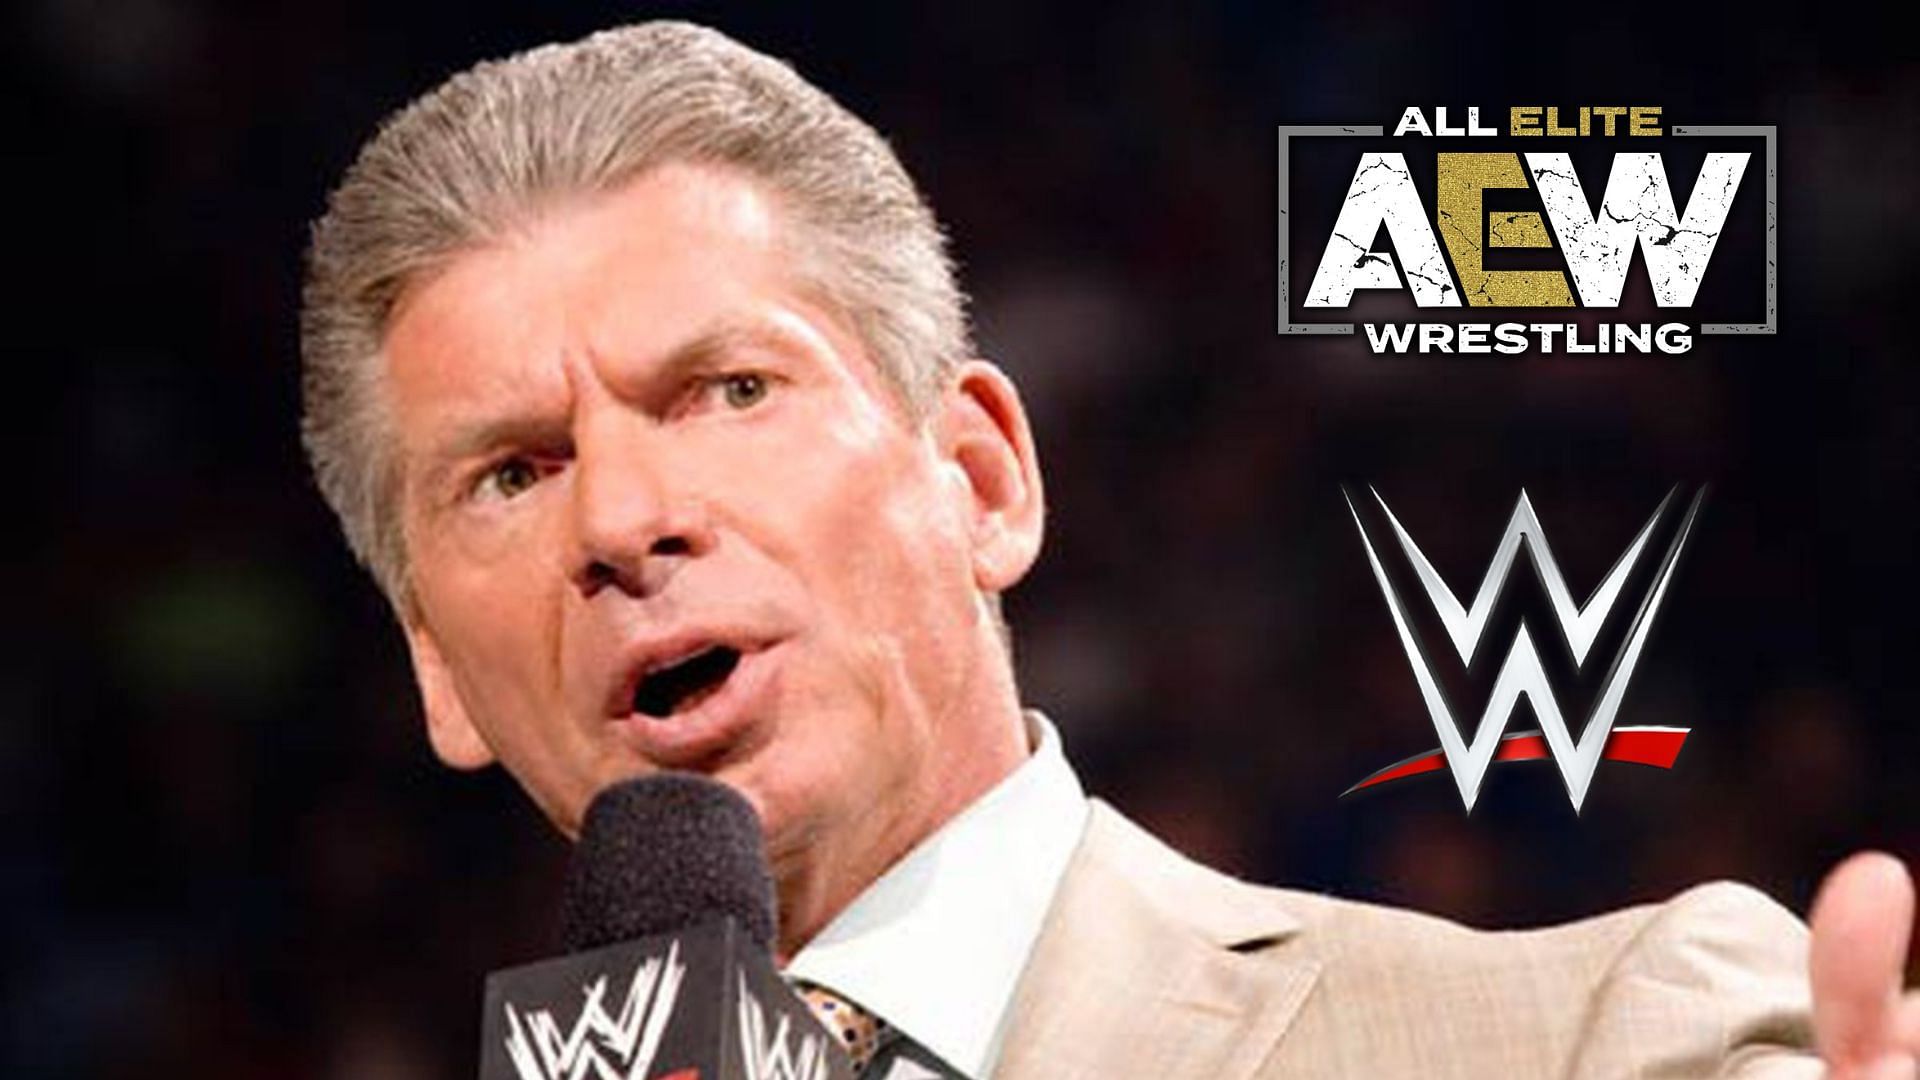 Vince McMahon would apparently have handled AEW very differently, according to a former WWE writer